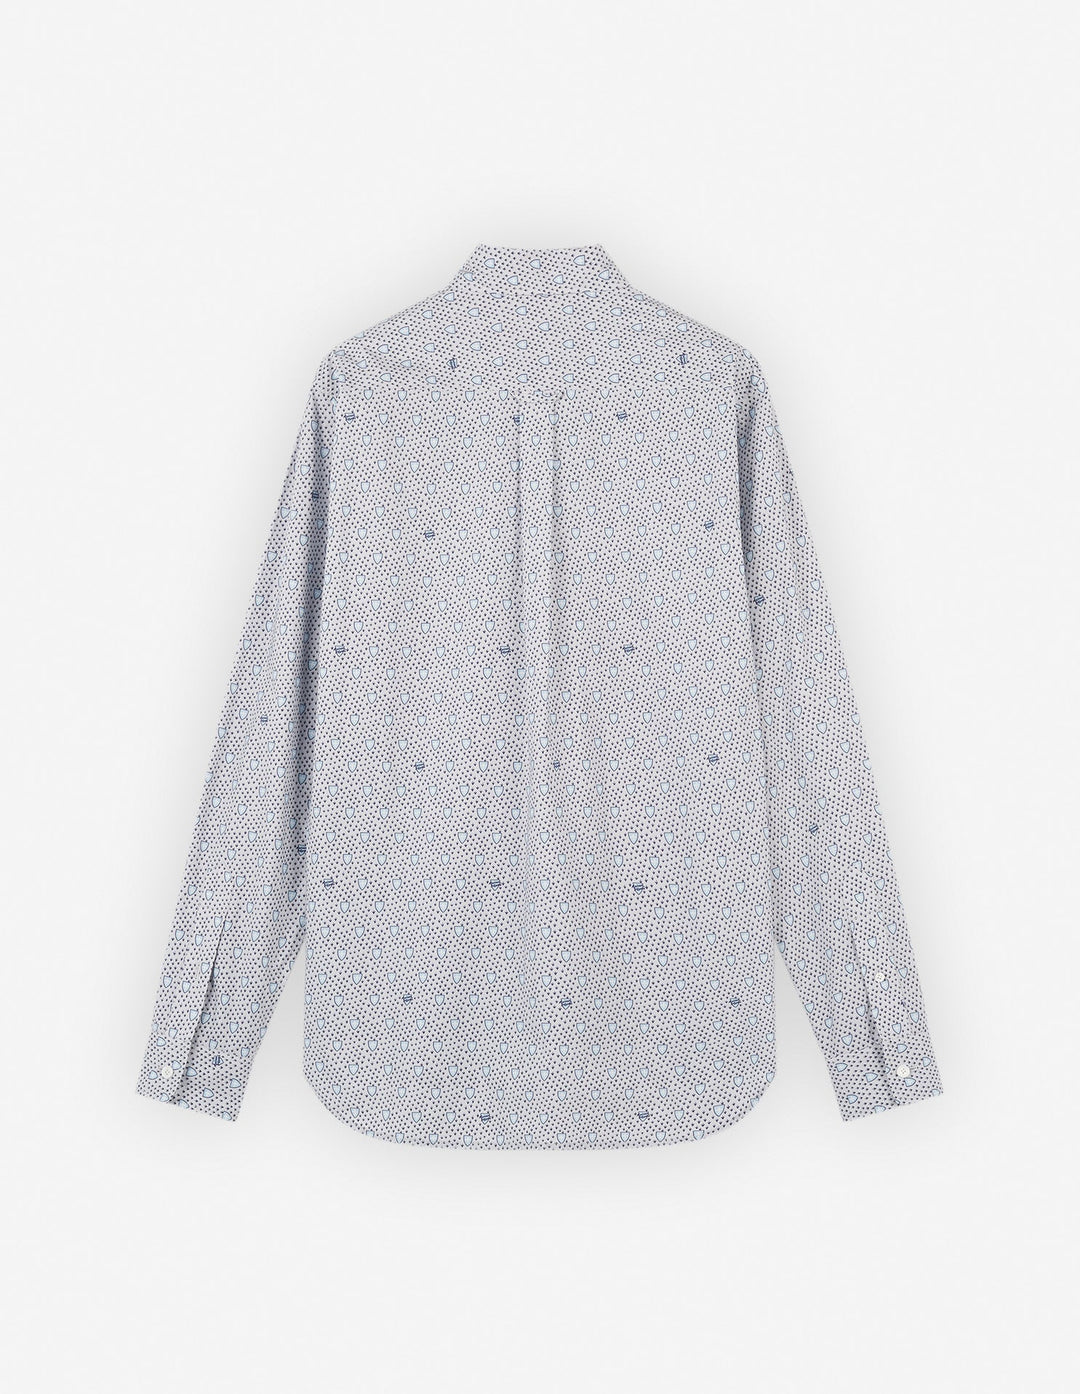 CLASSIC SHIRT IN SHIELD PRINTED COTTON